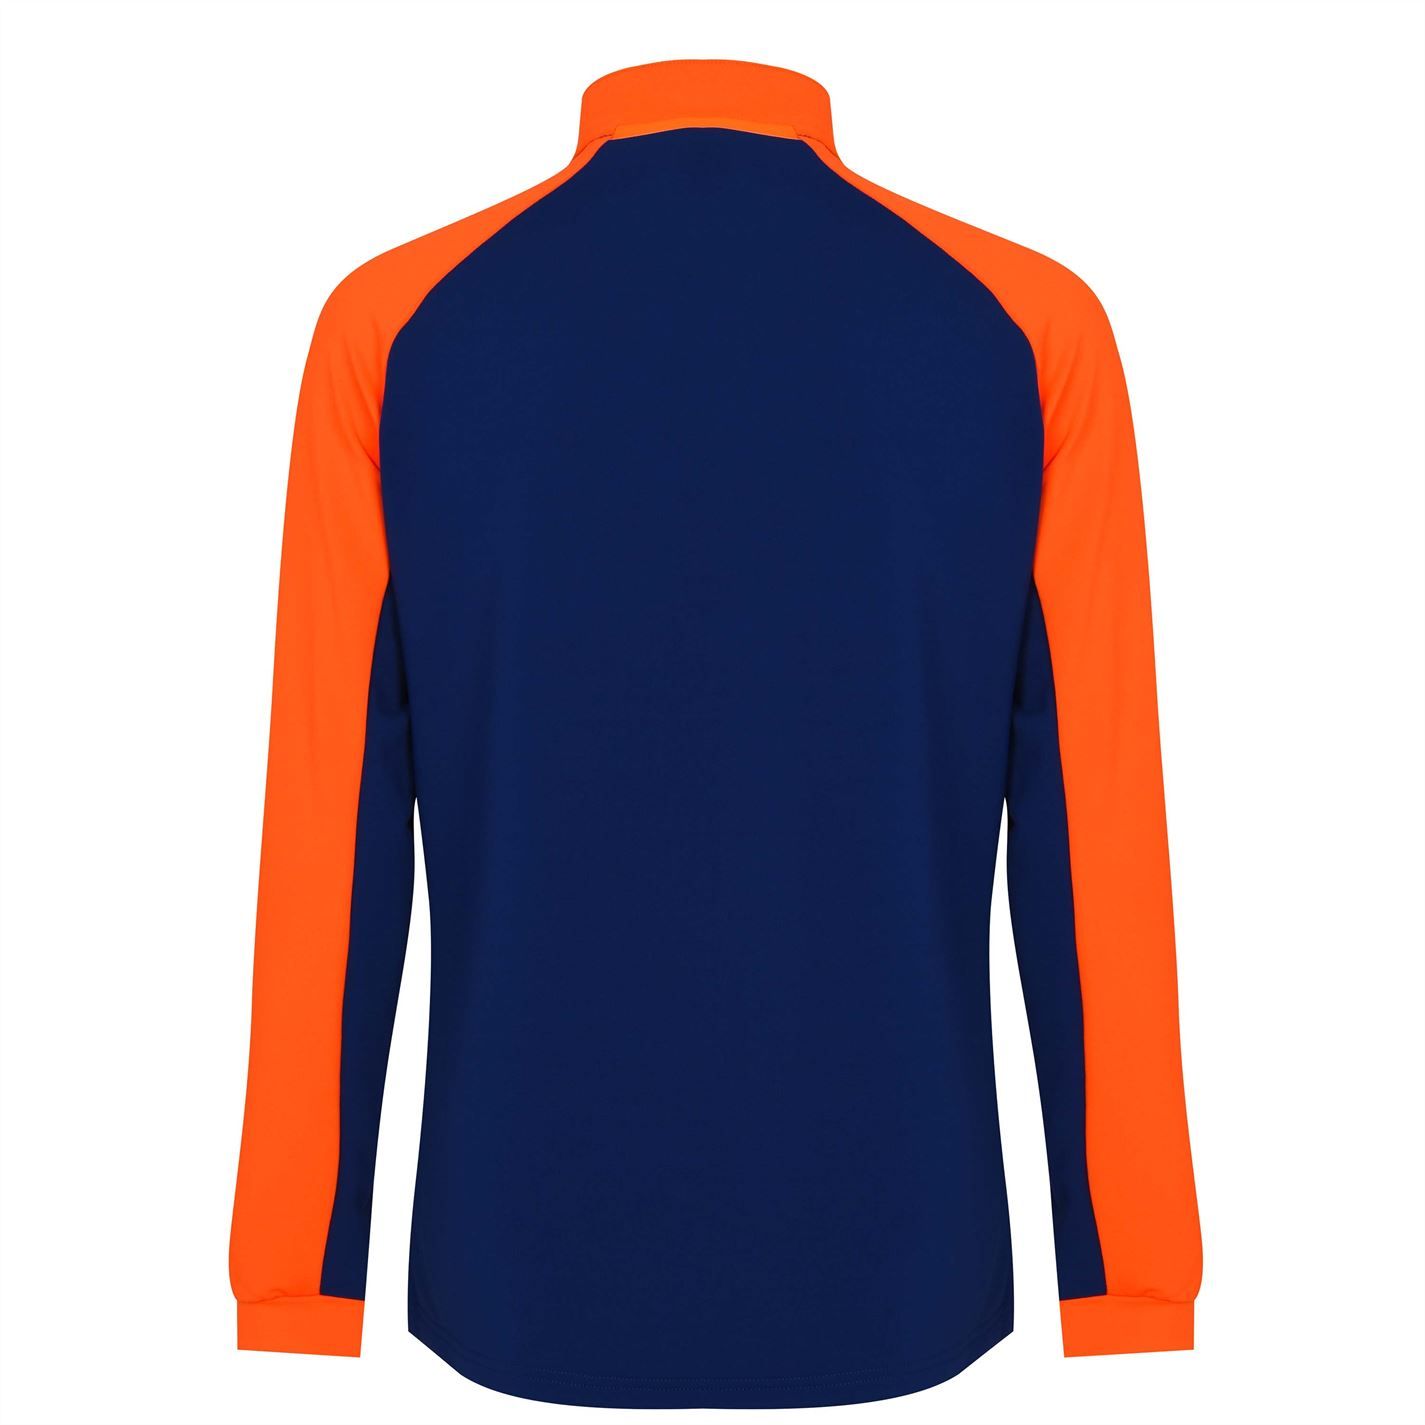 This Rangers Training Top by Castore has been crafted with high flex fabric which also wicks moisture away from the skin to ensure you can move with incredible freedom as well as remaining highly comfortable. The quarter zip fastening allows you to adjust the ventilation and take off with ease when you've fully warmed up, while the team crest highlights your support for the Gers with pride and the Castore branding completes the design.